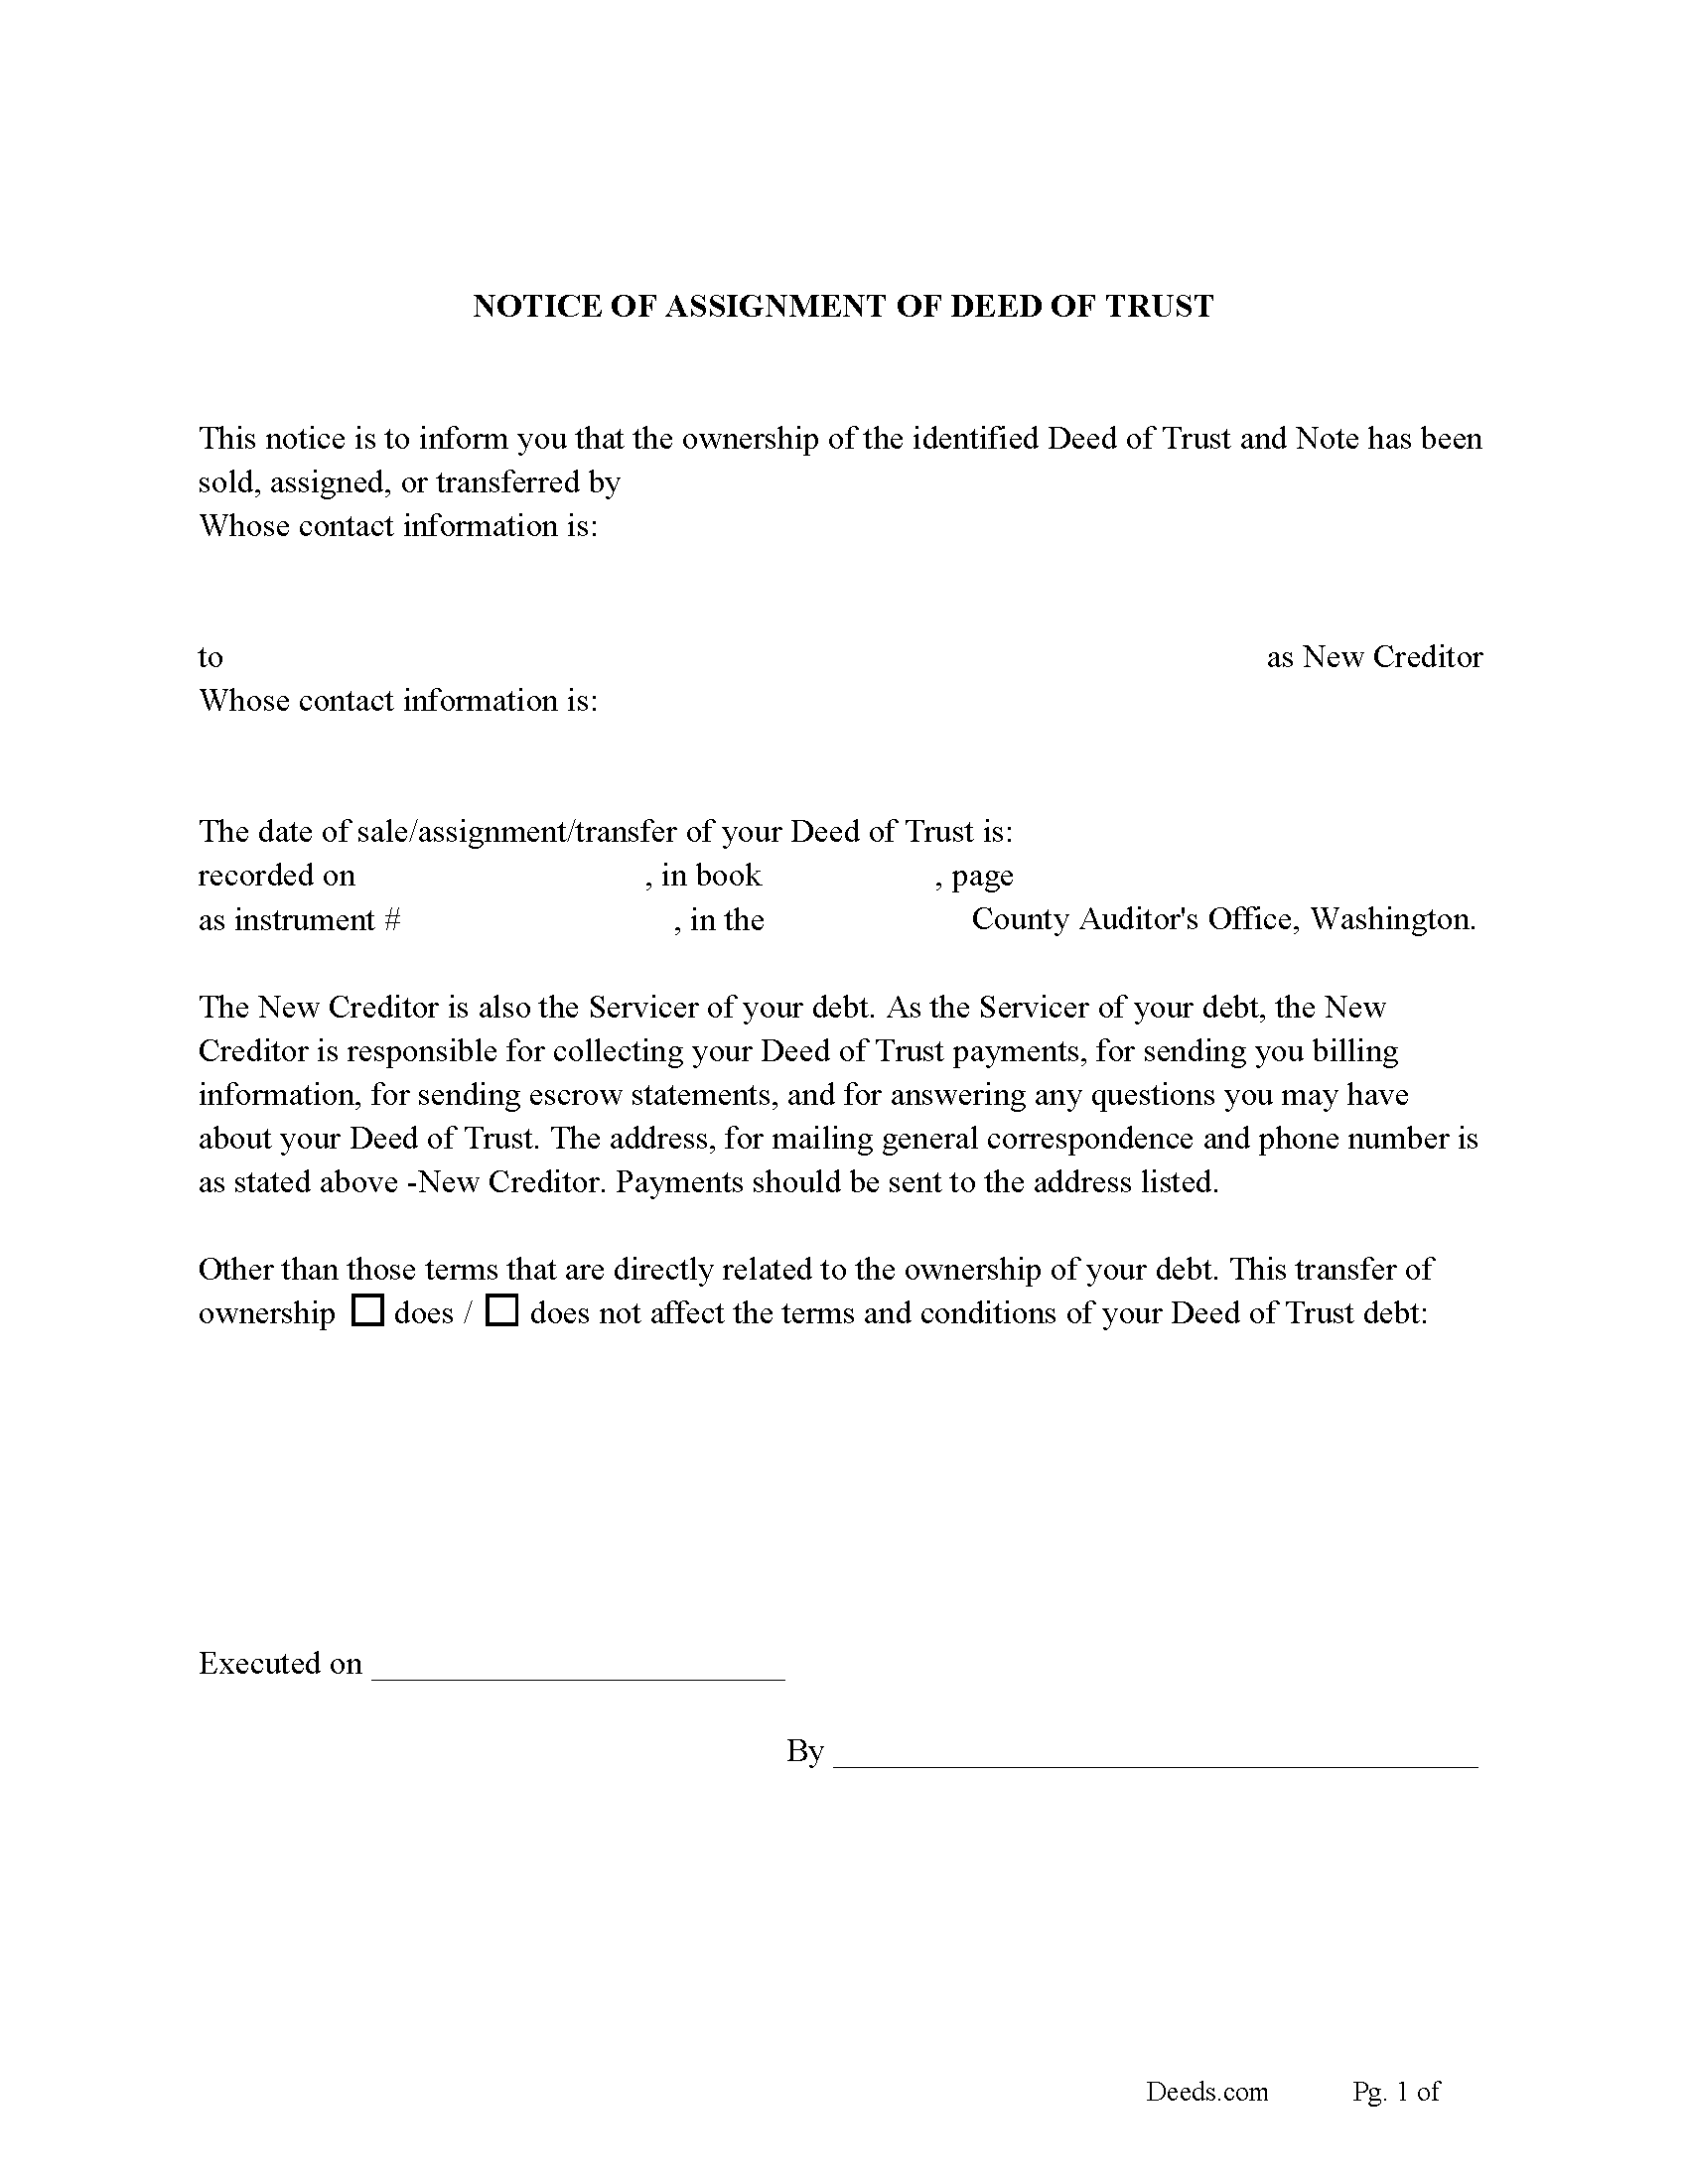 Skamania County Notice of Assignment of Deed of Trust Form